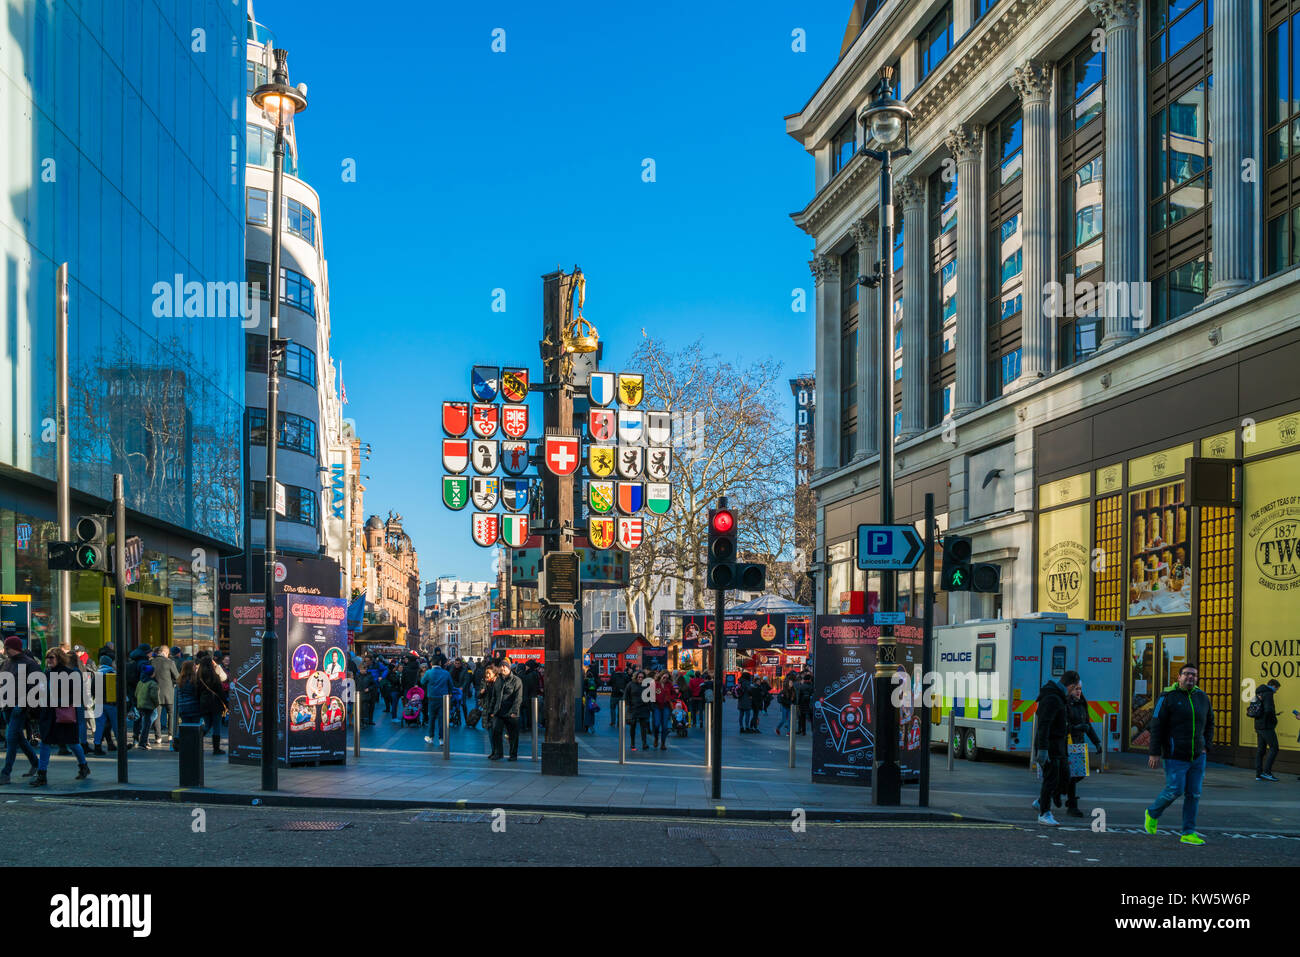 LONDON DECEMBER 28, 2017: Tourists and Londoners enjoy sunny day on Leicester Square, pedestrianised square which is a famous destination for night li Stock Photo